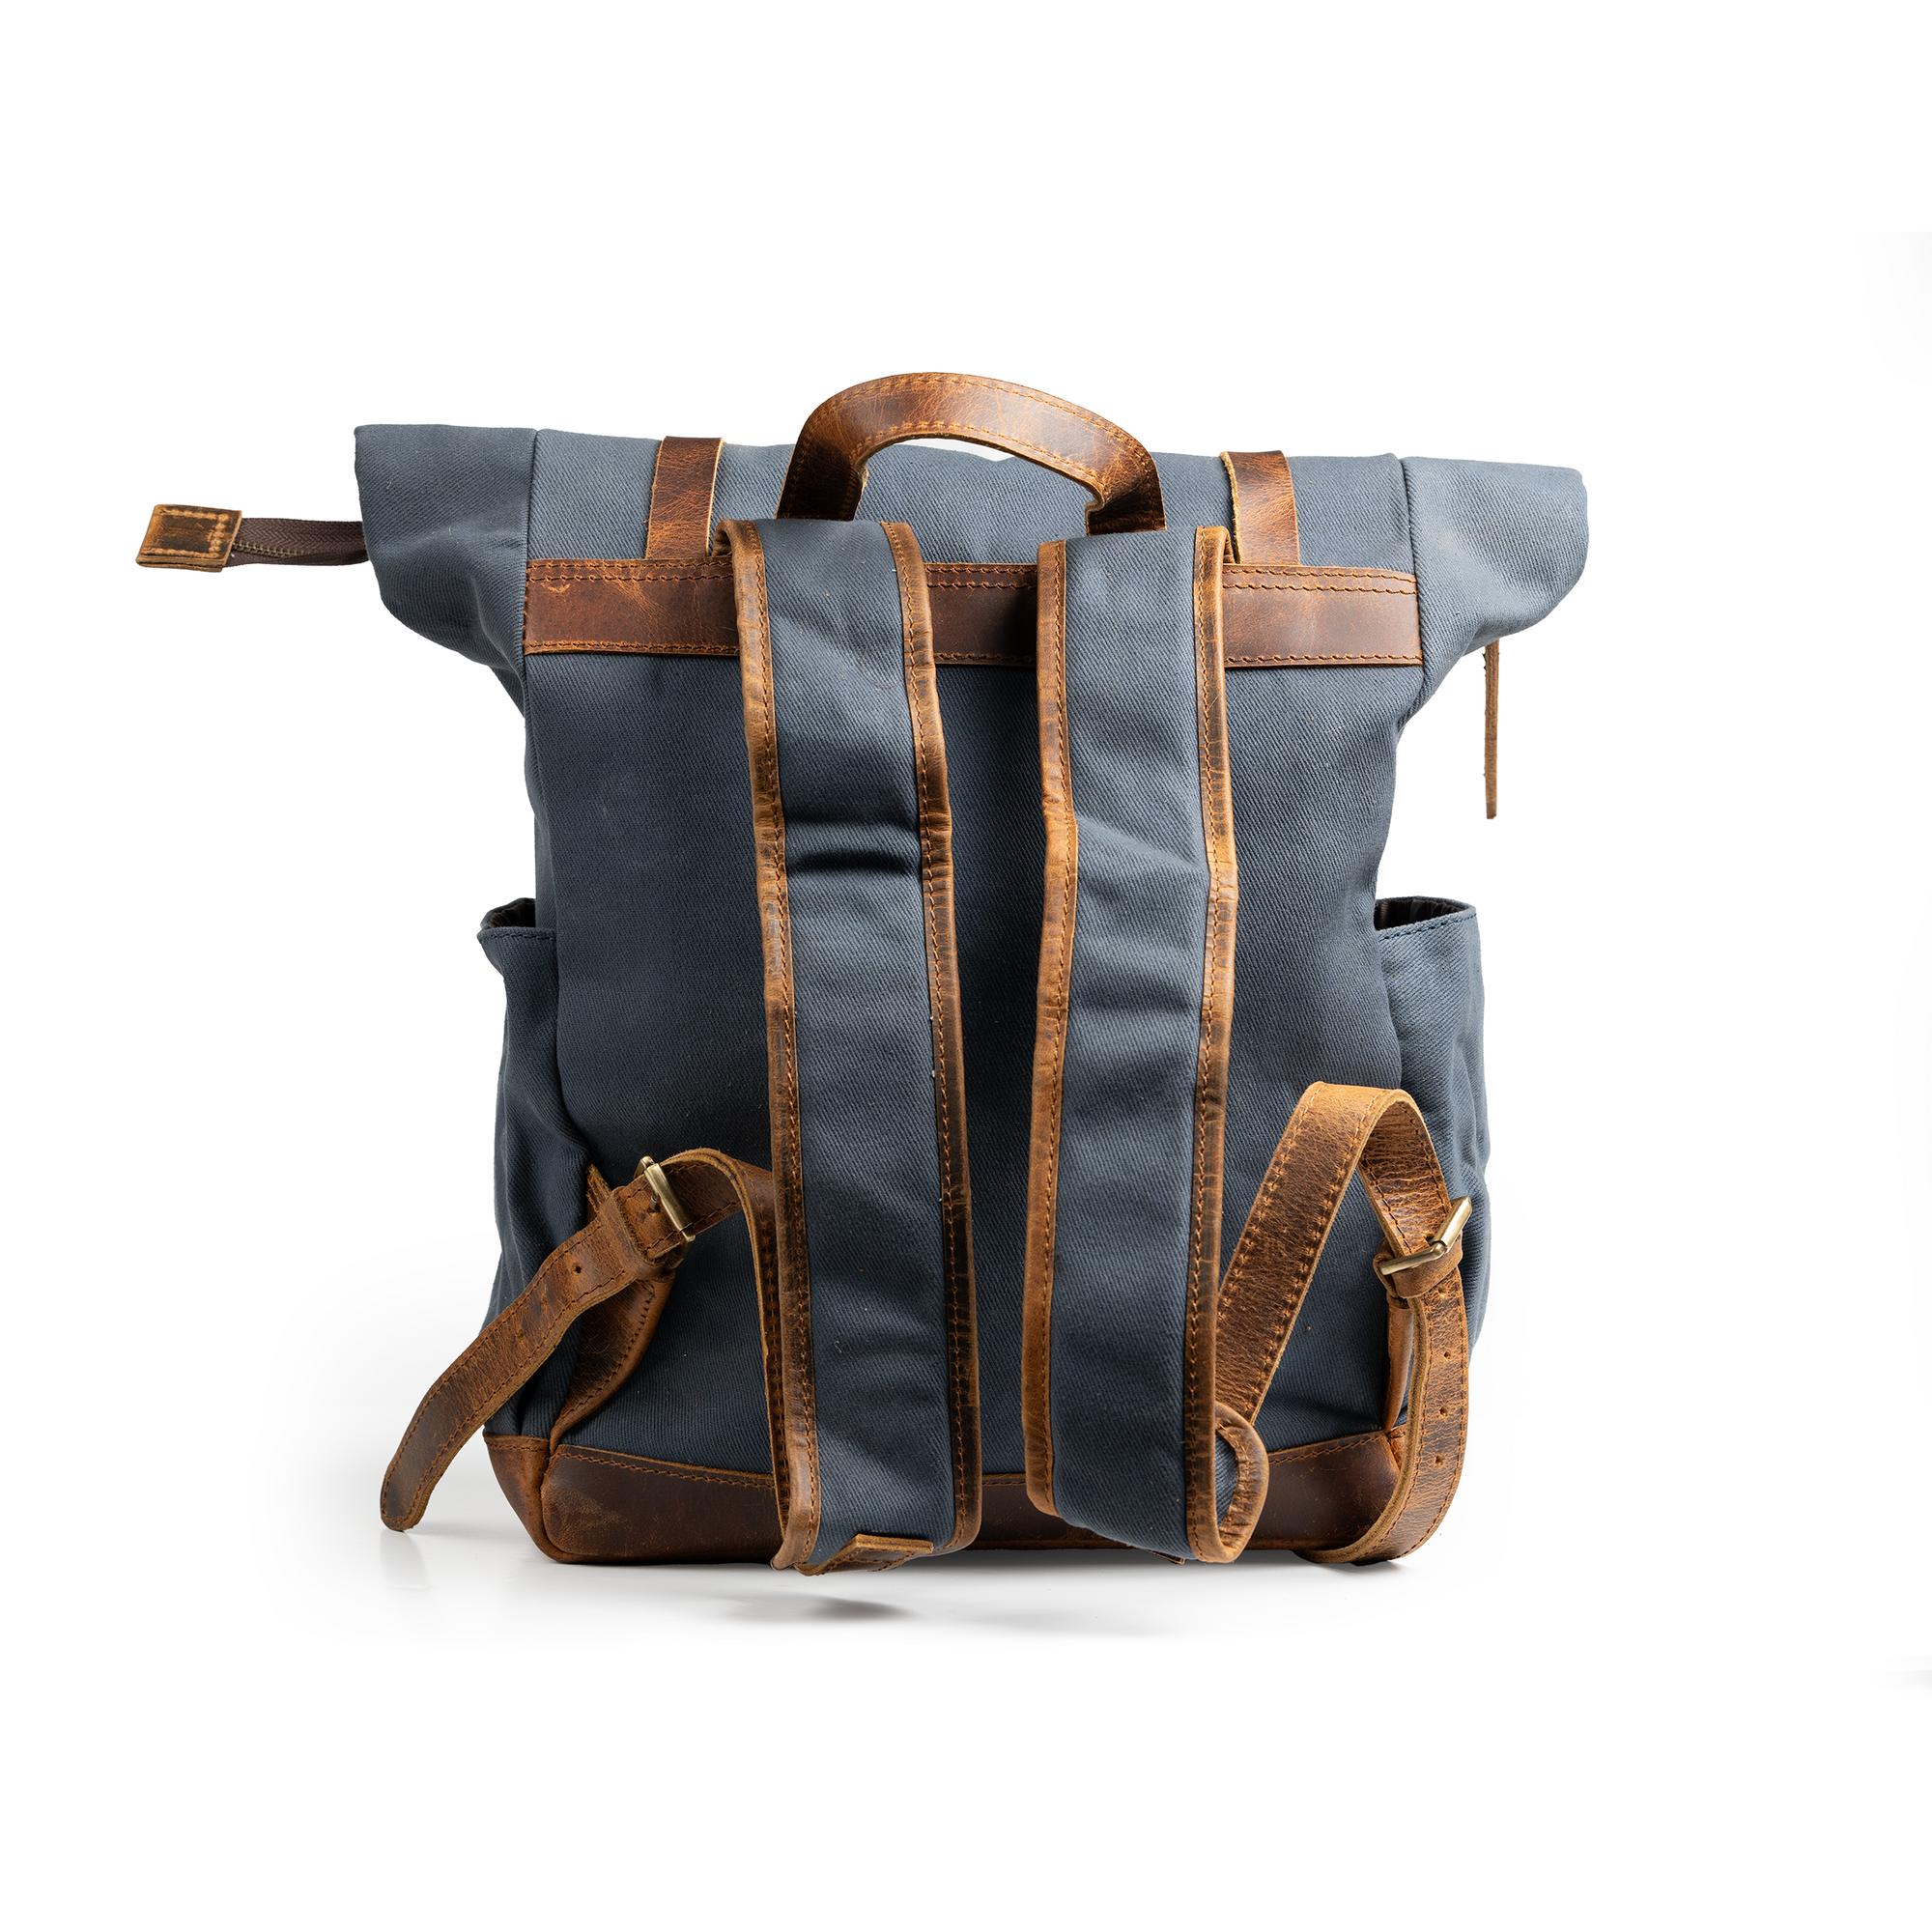 The “Jackson” Backpack